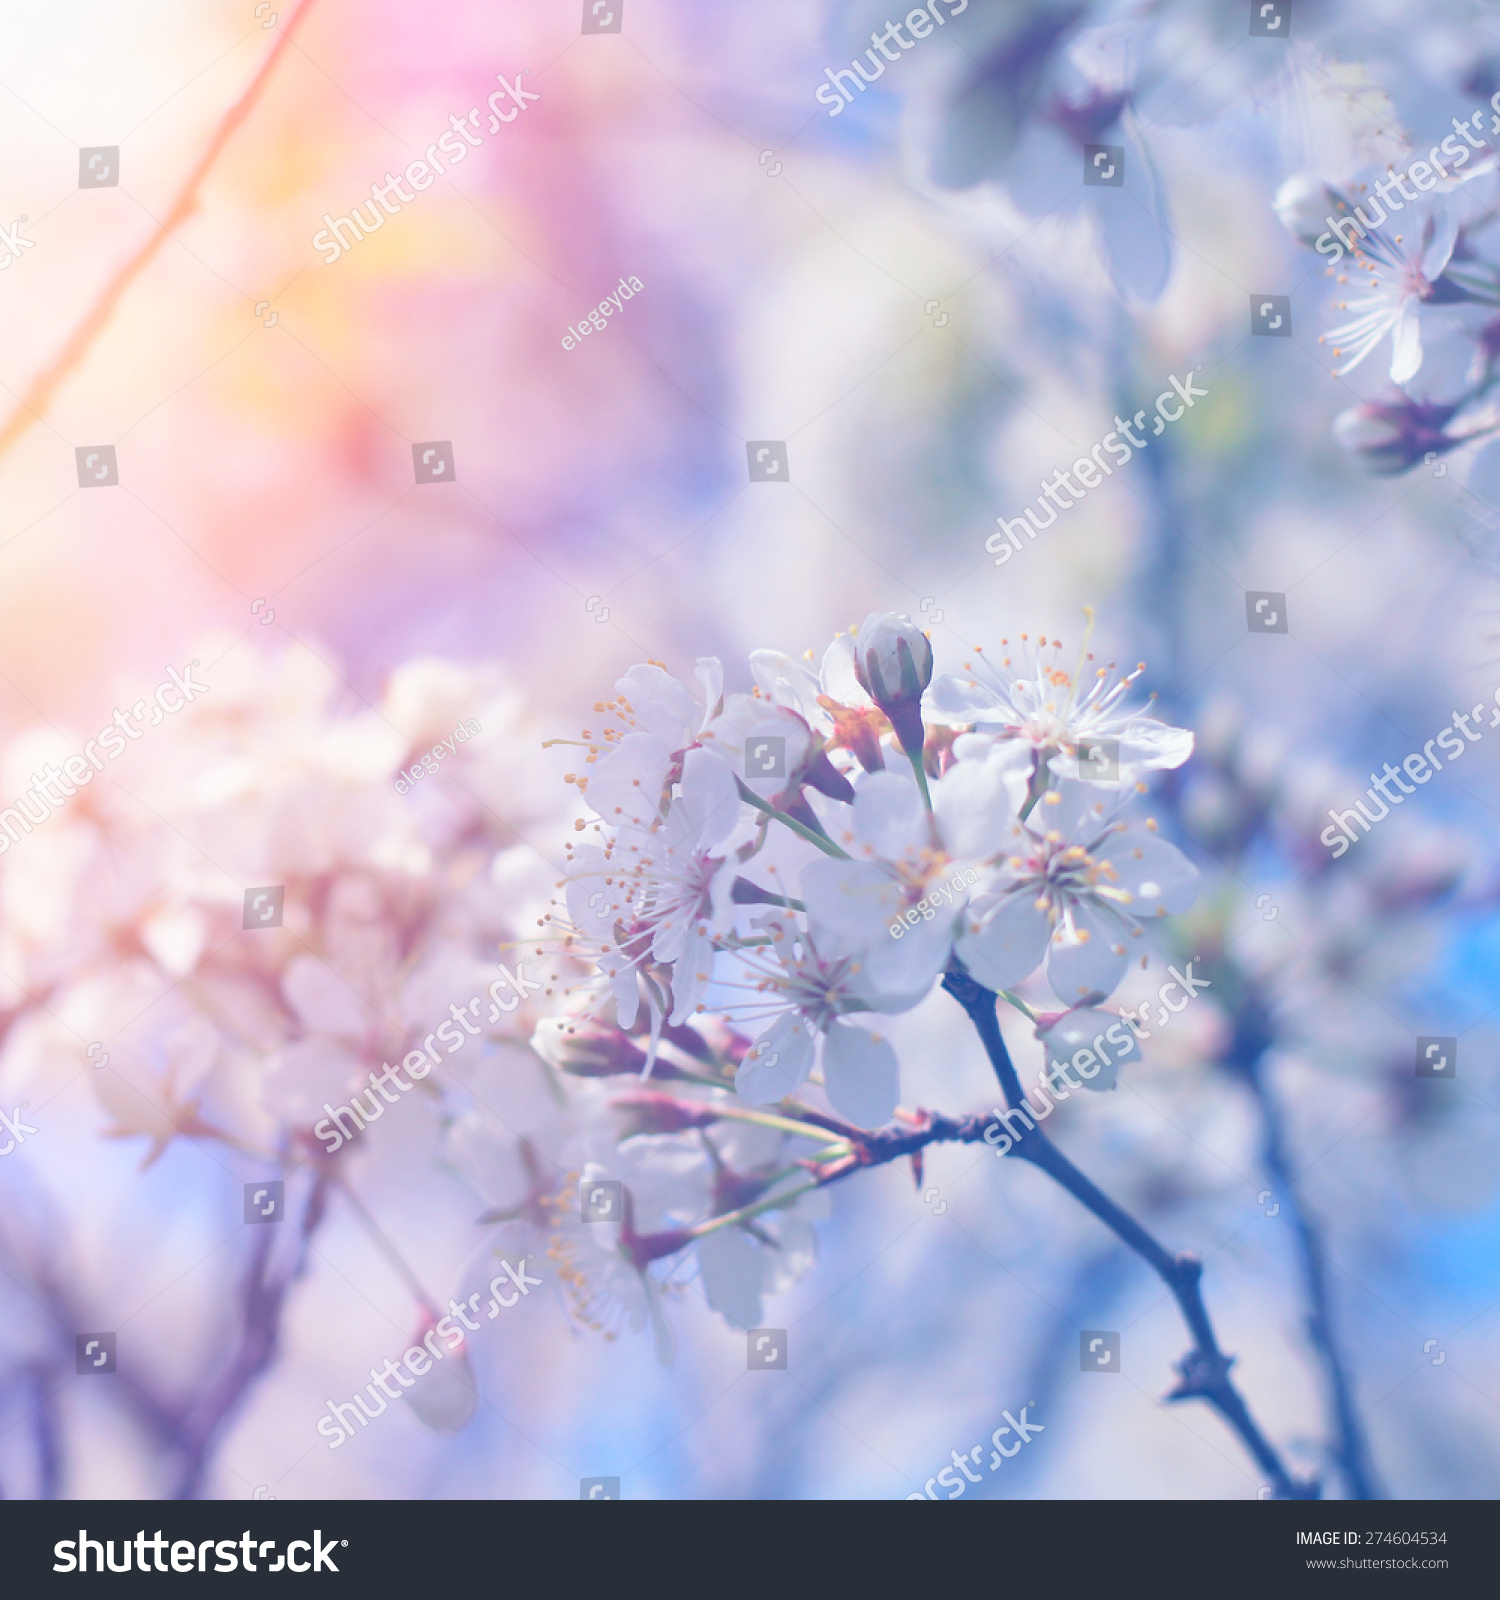 Beautiful Spring Soft Flowers On Blossoming Stock Photo 274604534 ...